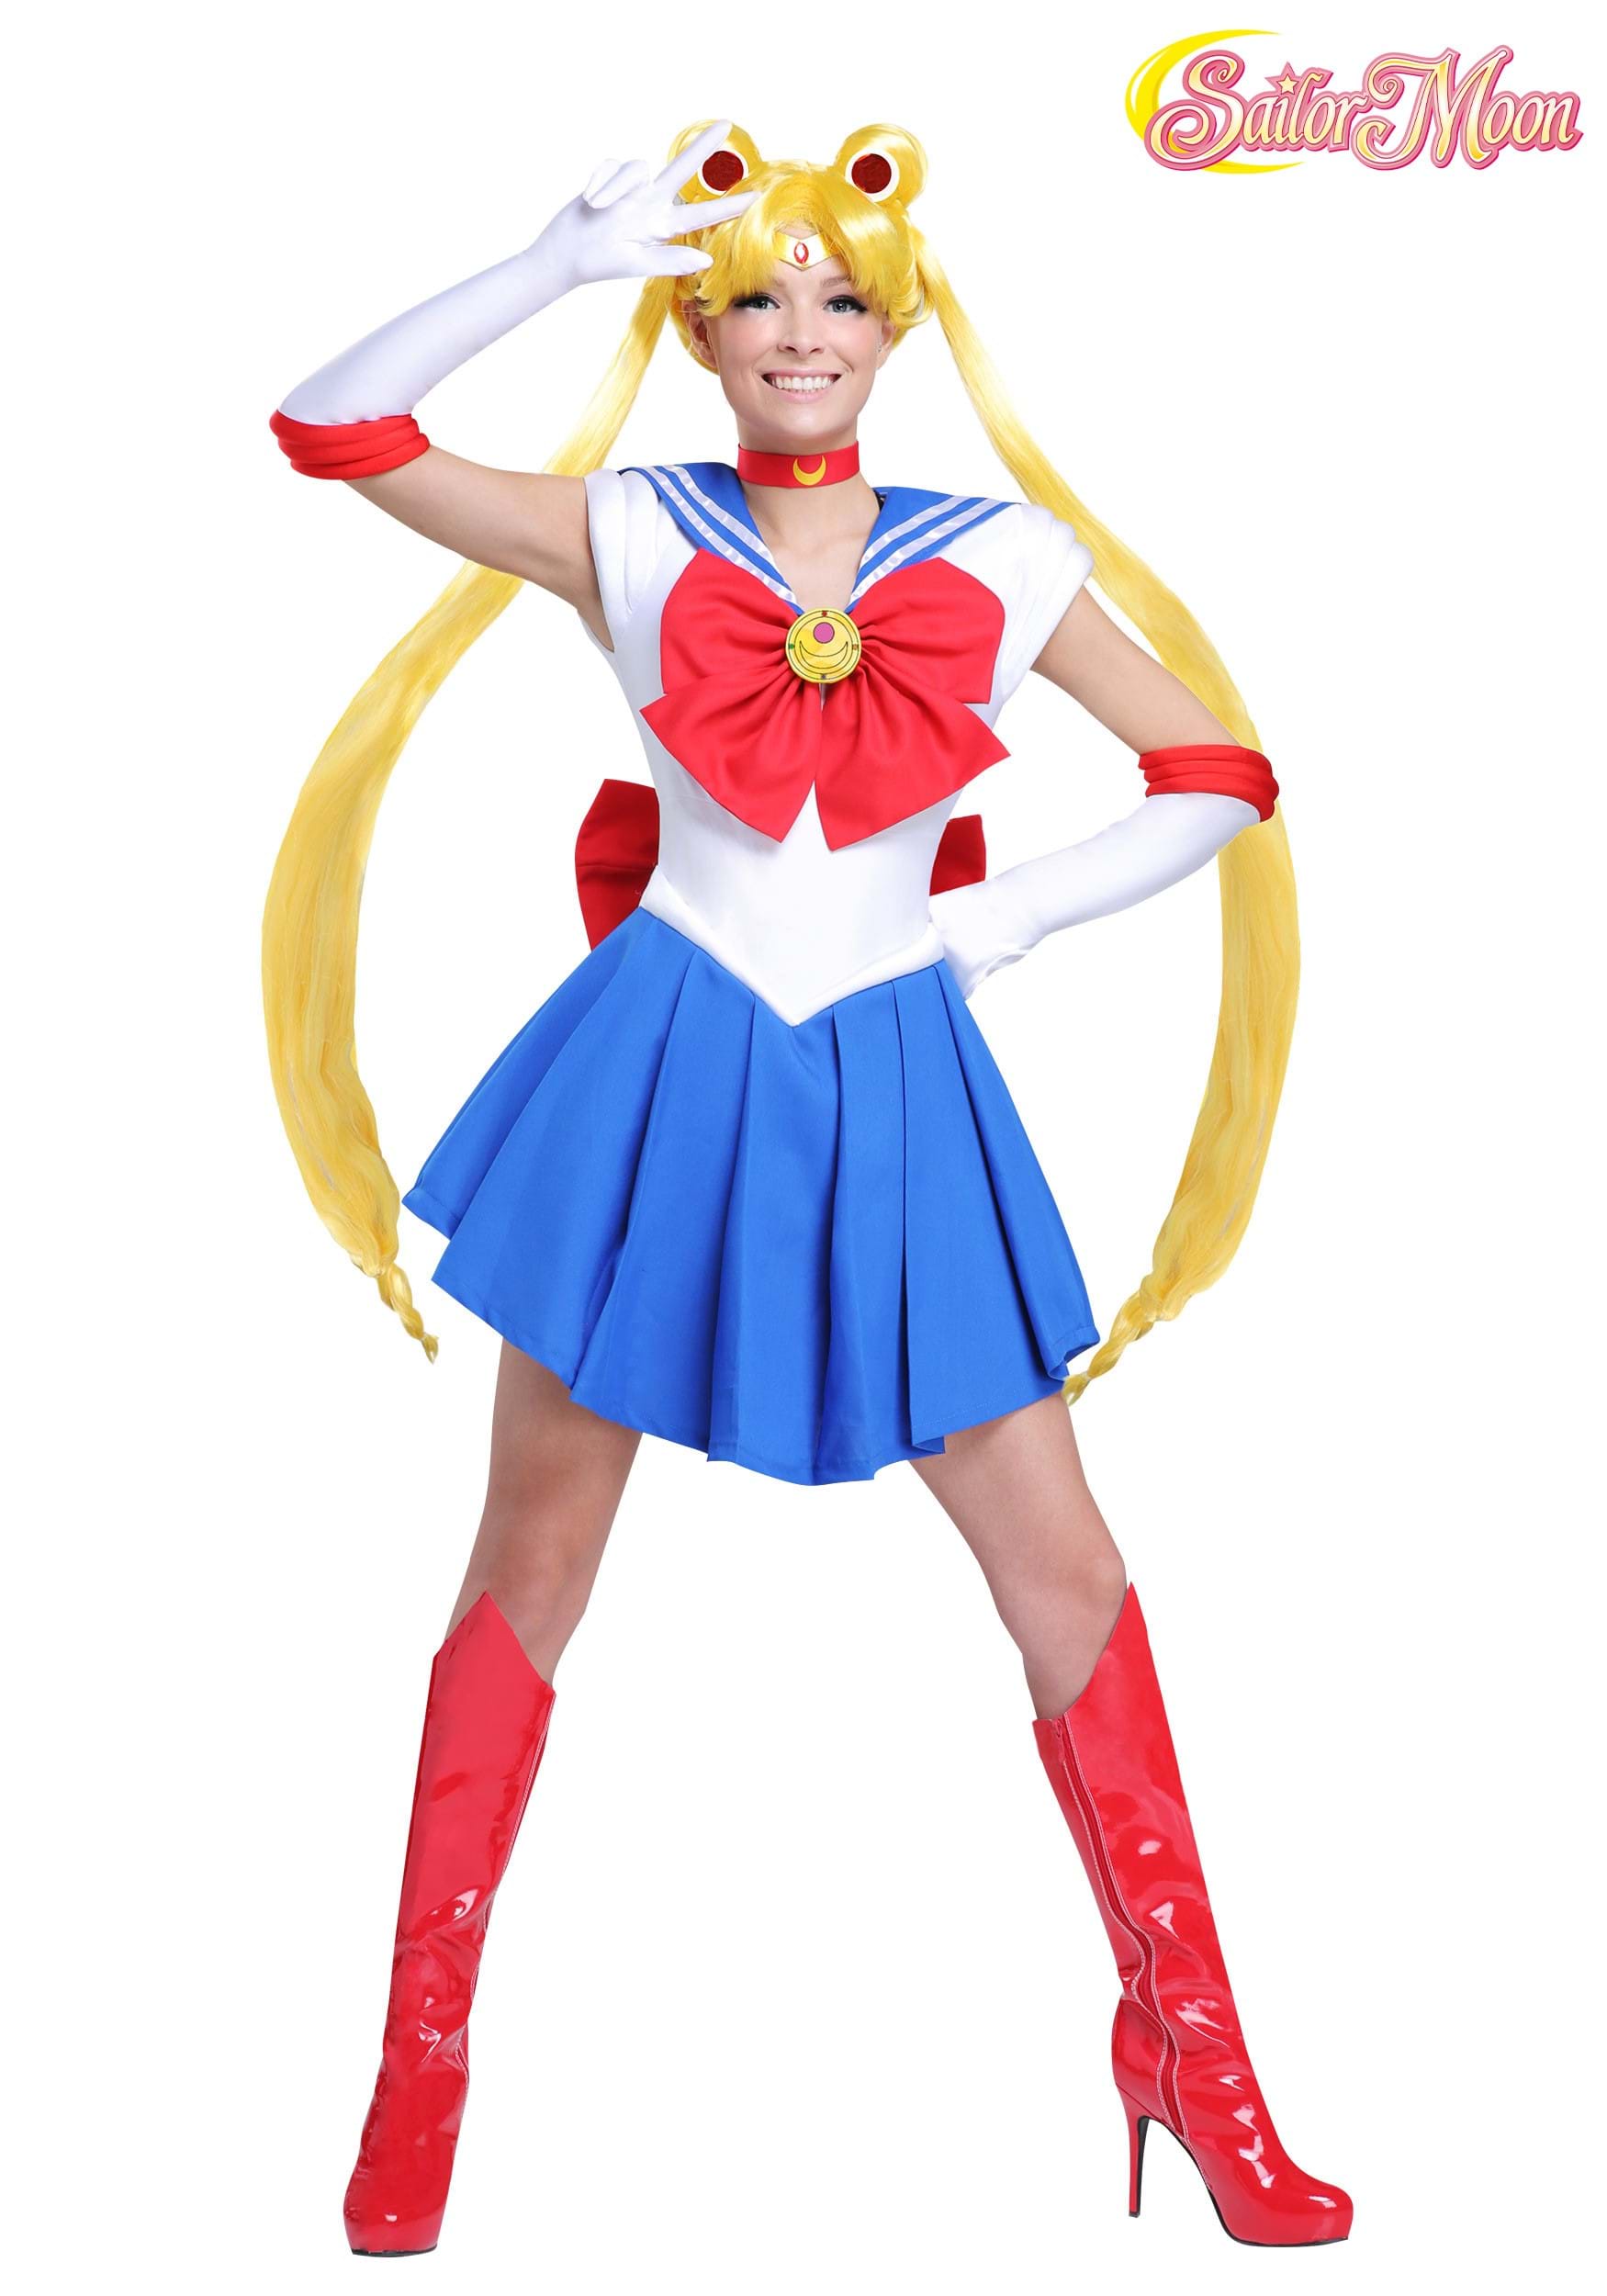 https://images.fun.com/products/41067/1-1/sailor-moon-costume.jpg